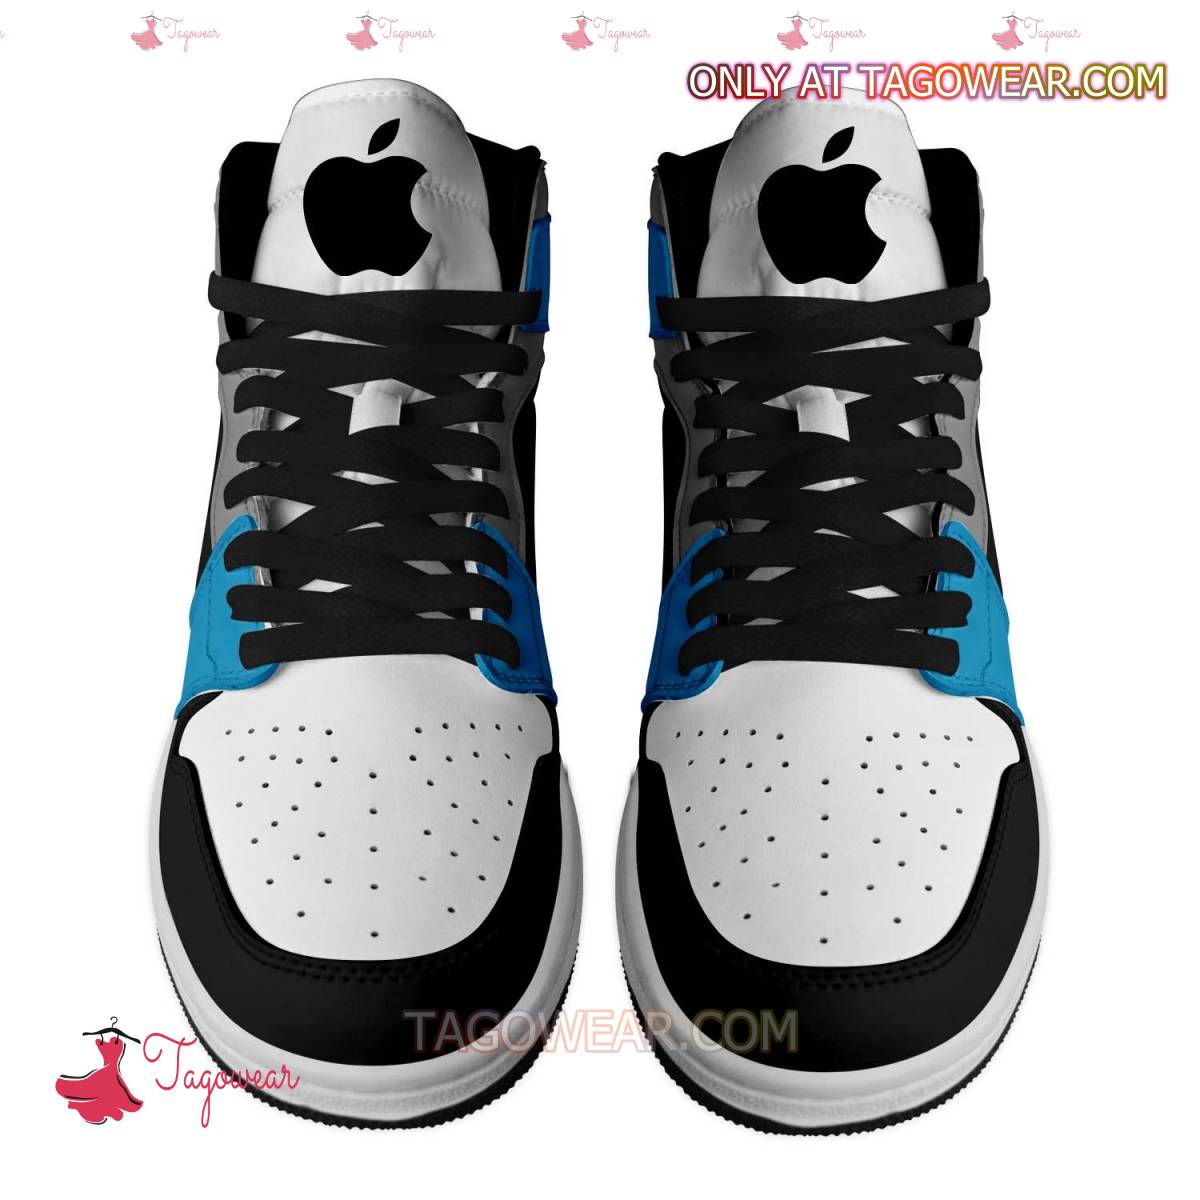 Apple Think Different Air Jordan High Top Shoes a